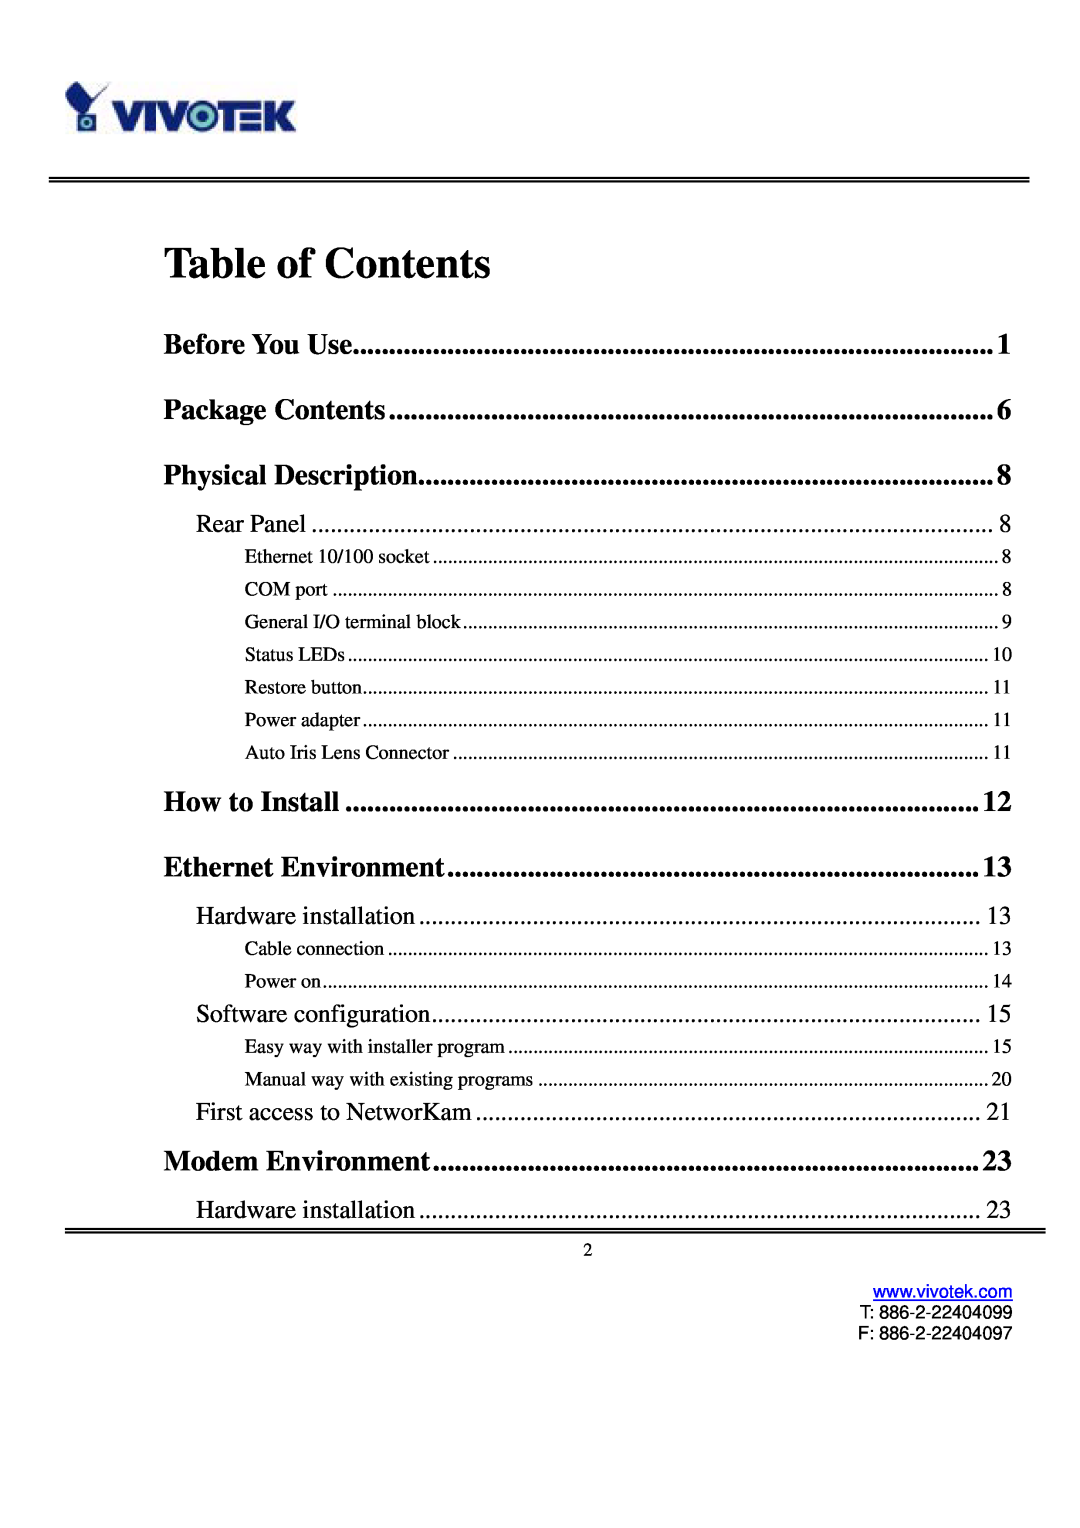 Vivotek IP3111/IP3121 user manual Table of Contents, Before You Use, Package Contents, Physical Description, Rear Panel 